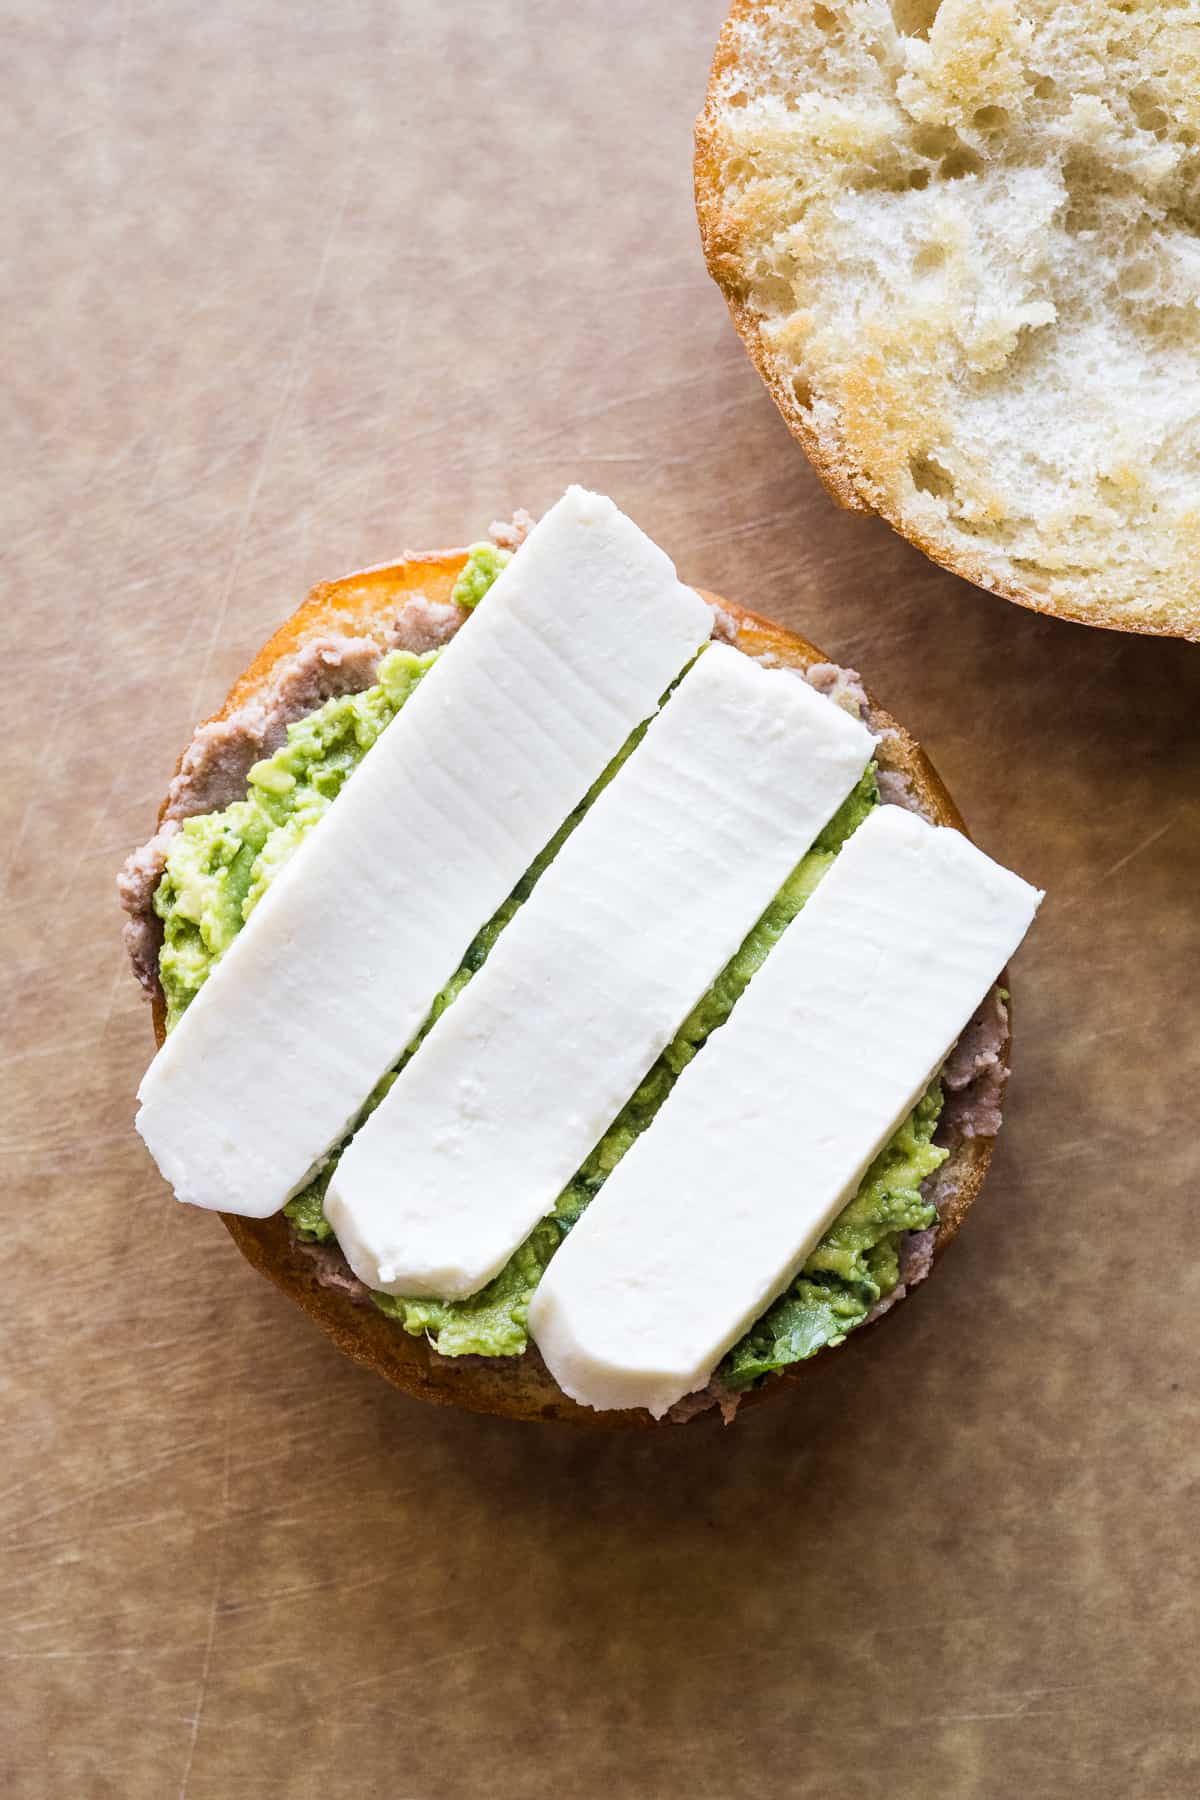 Queso fresco, refried beans and guacamole smeared on a telera roll.